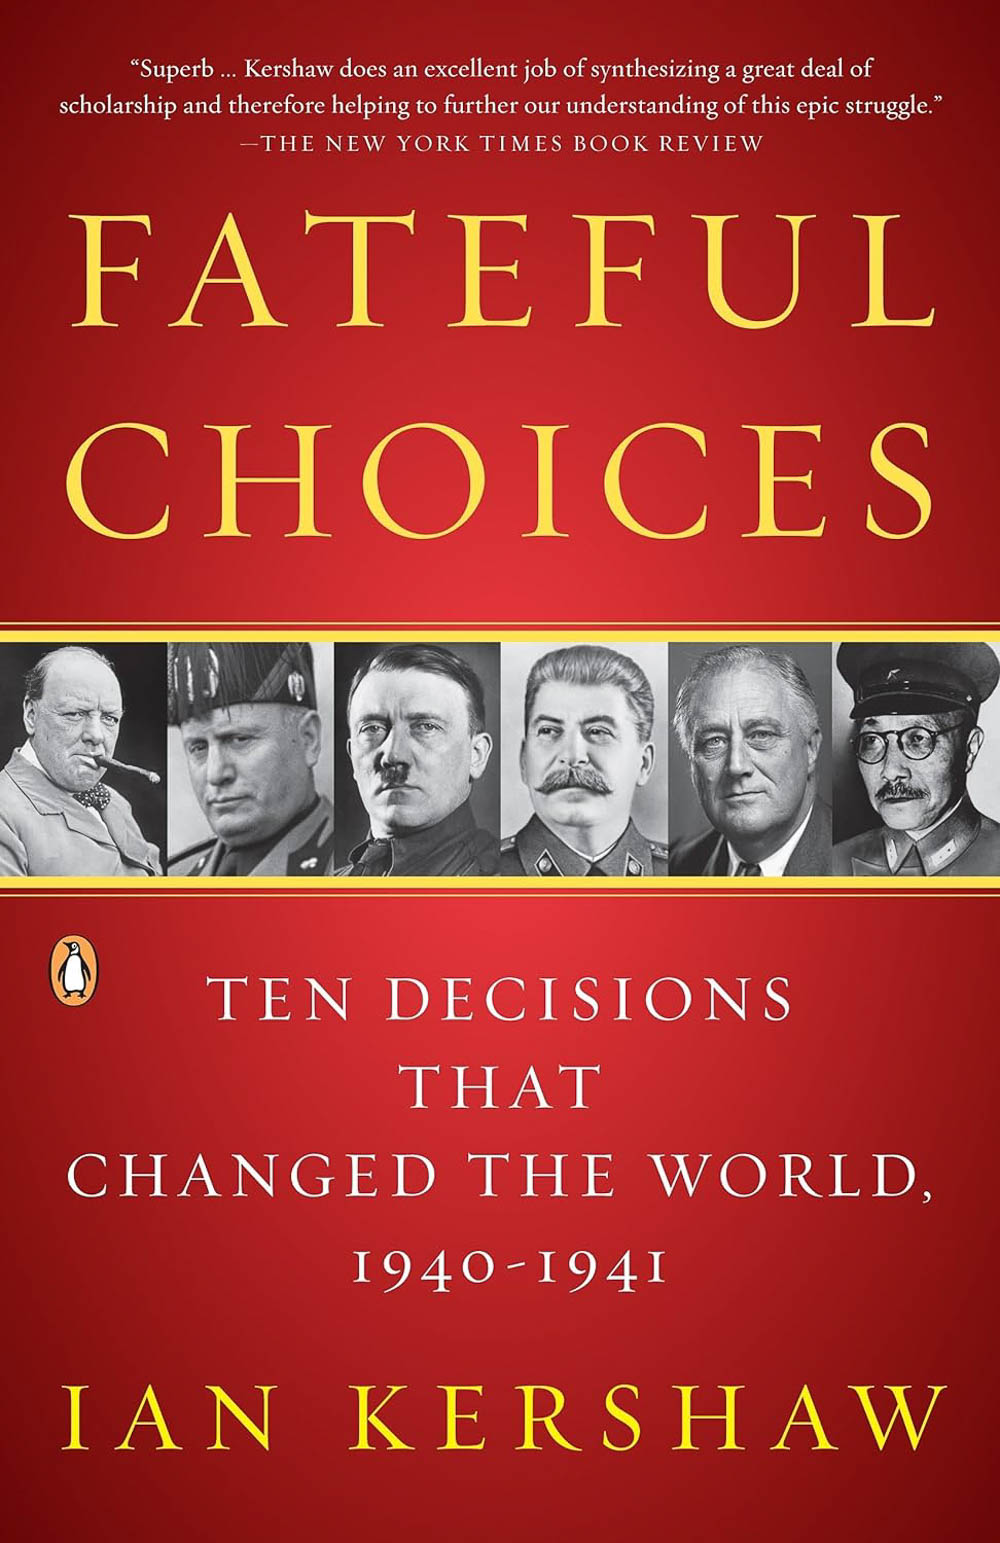 red book cover for fateful choices with photos of churchill, mussolini, hitler, stalin, roosevelt, and tojo hideki on it